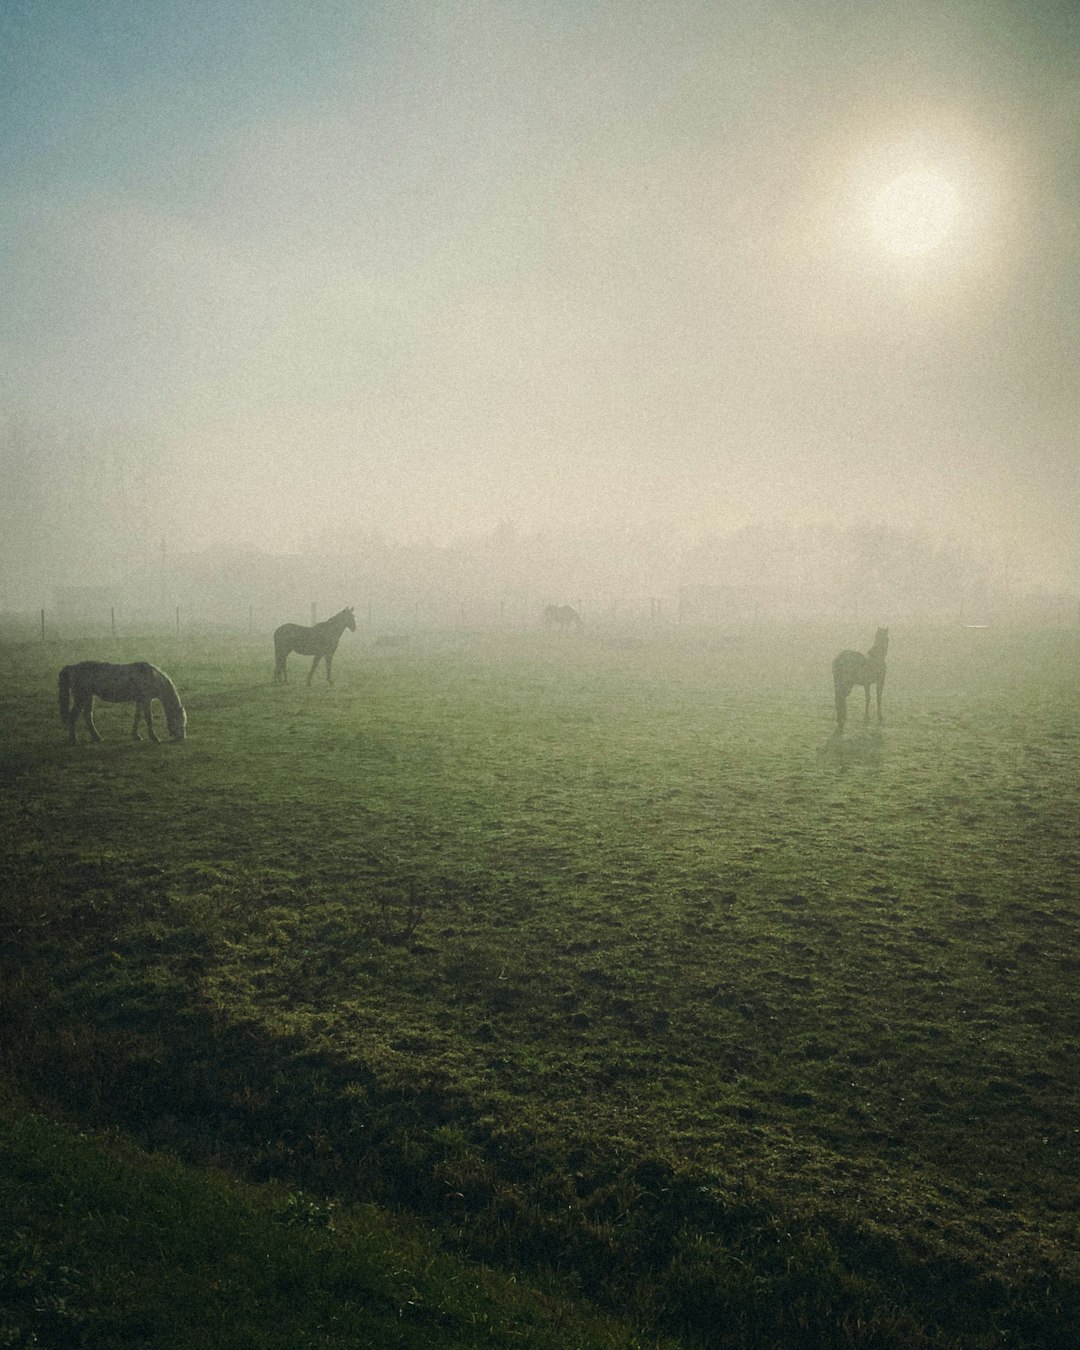 white horse on green grass field during foggy day